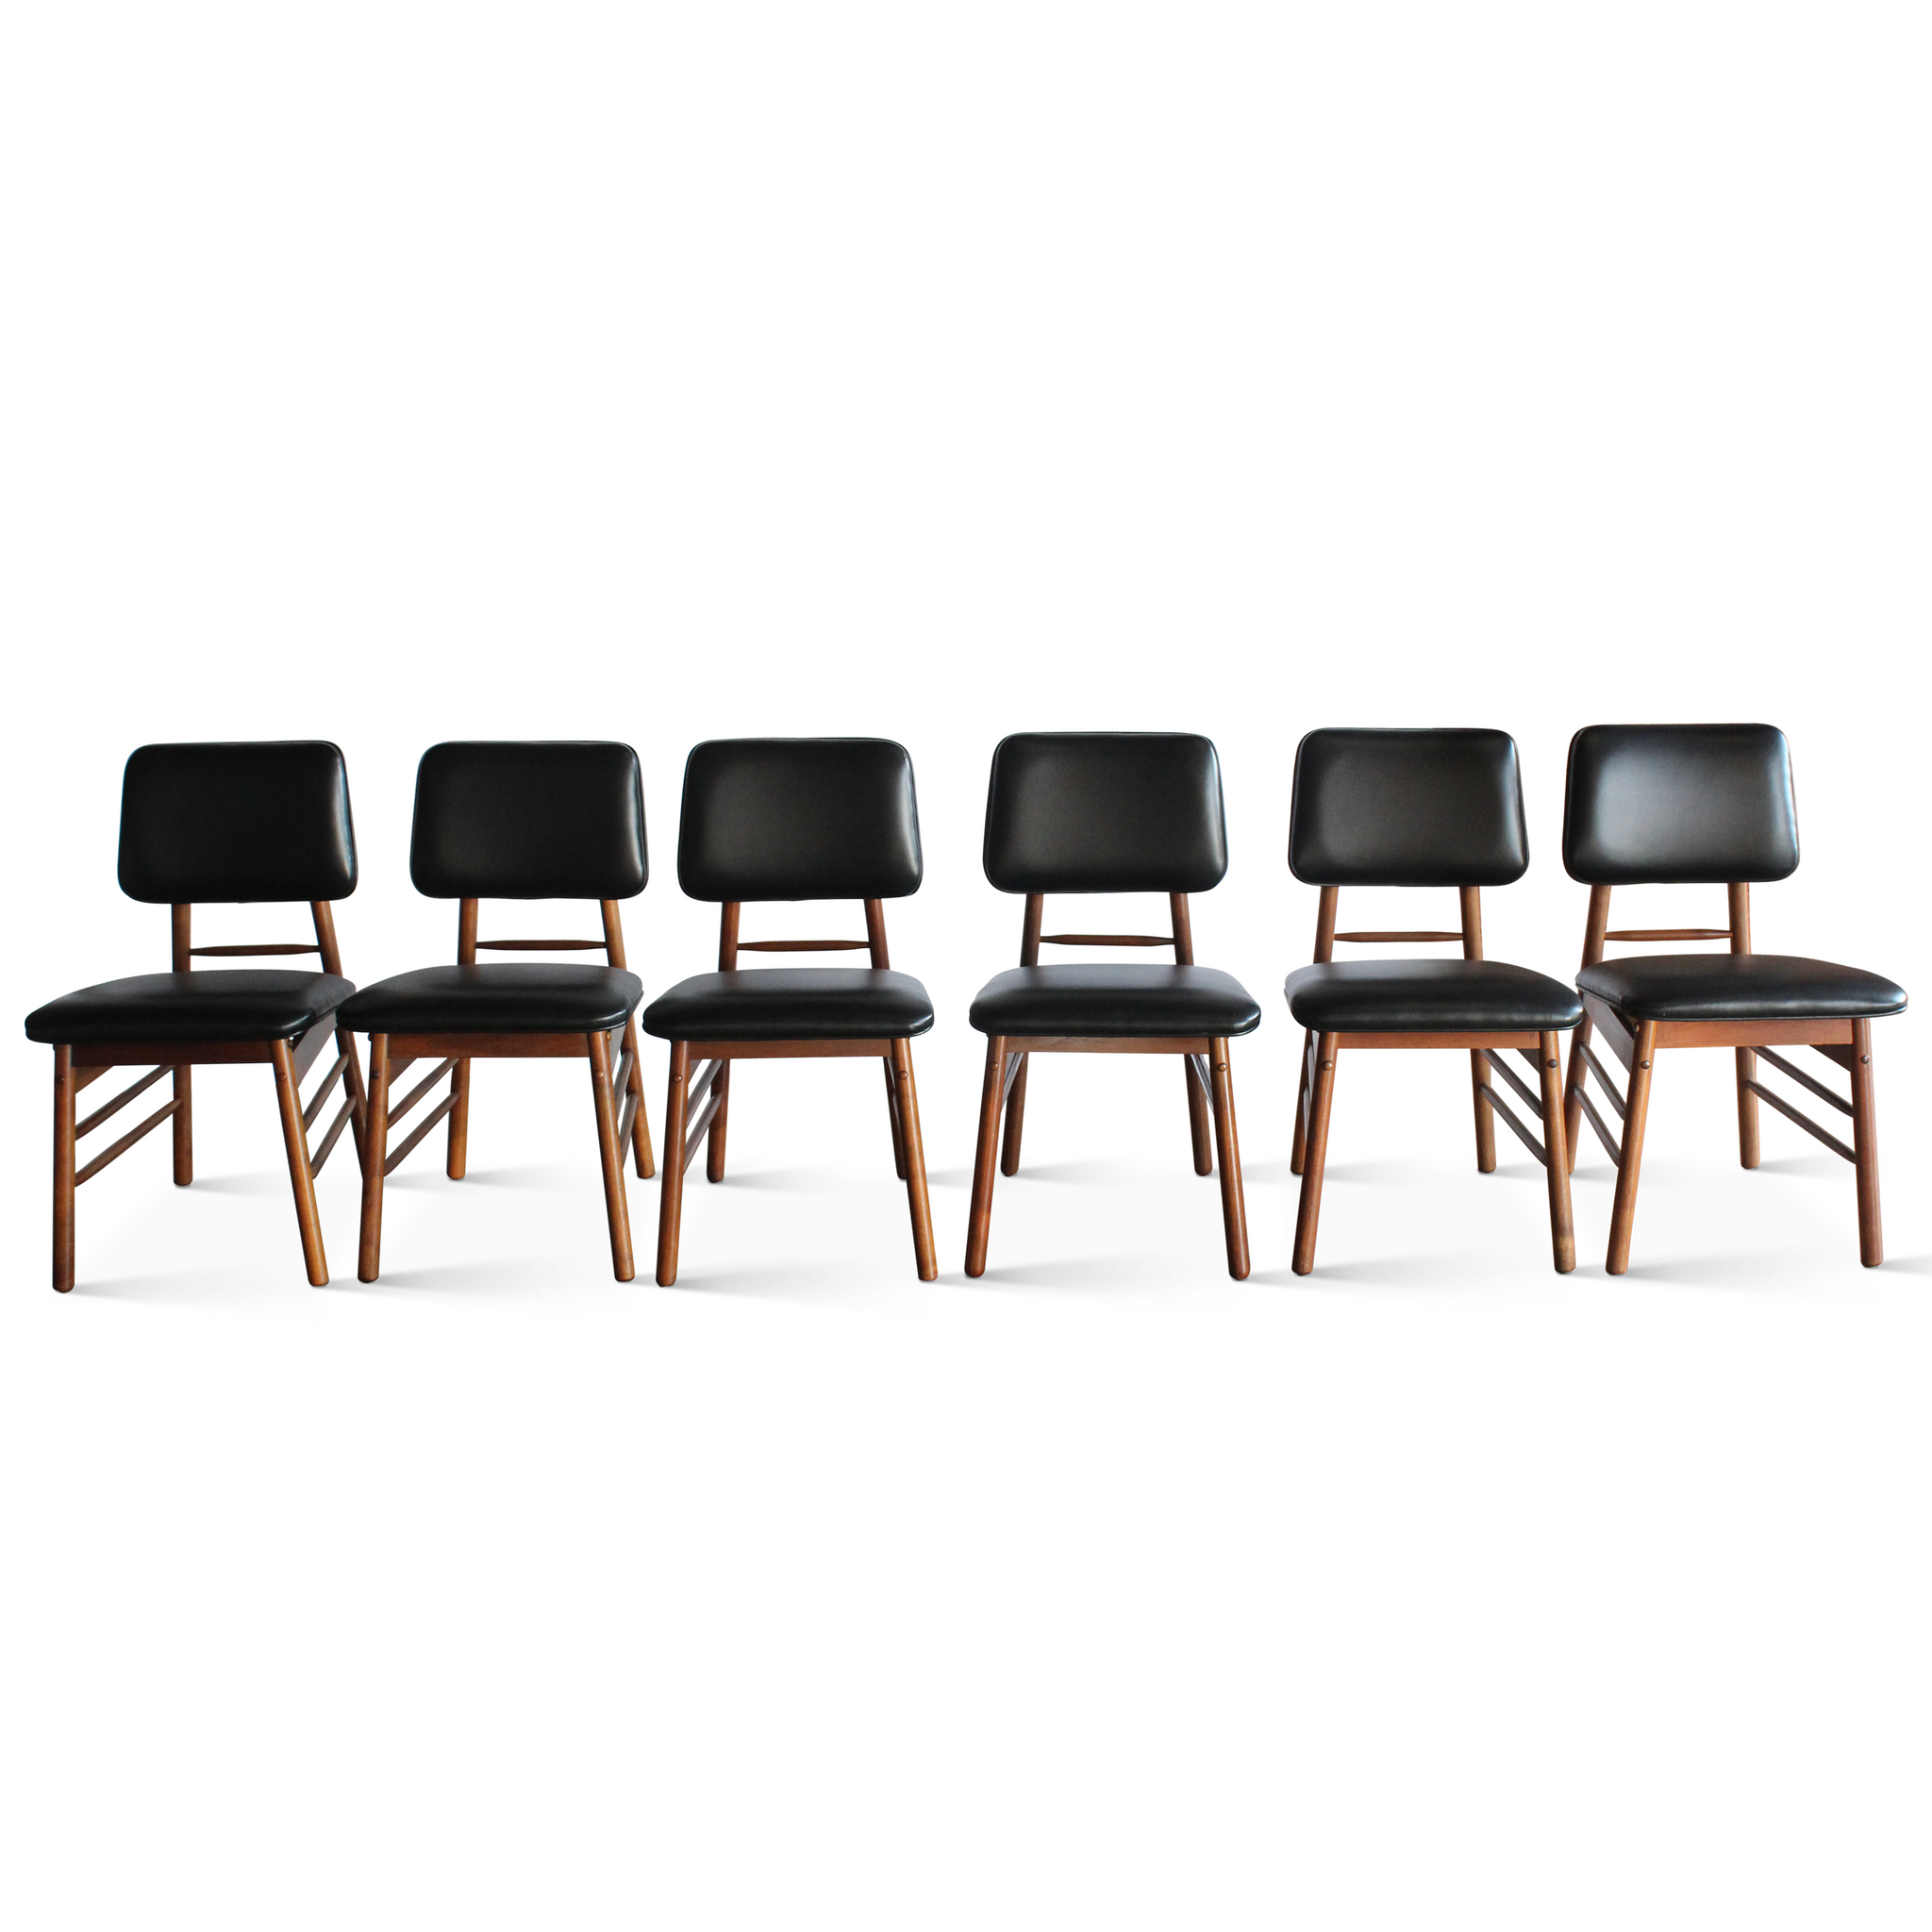 Set of Six Dining Chairs by Greta Grossman for Glen of California